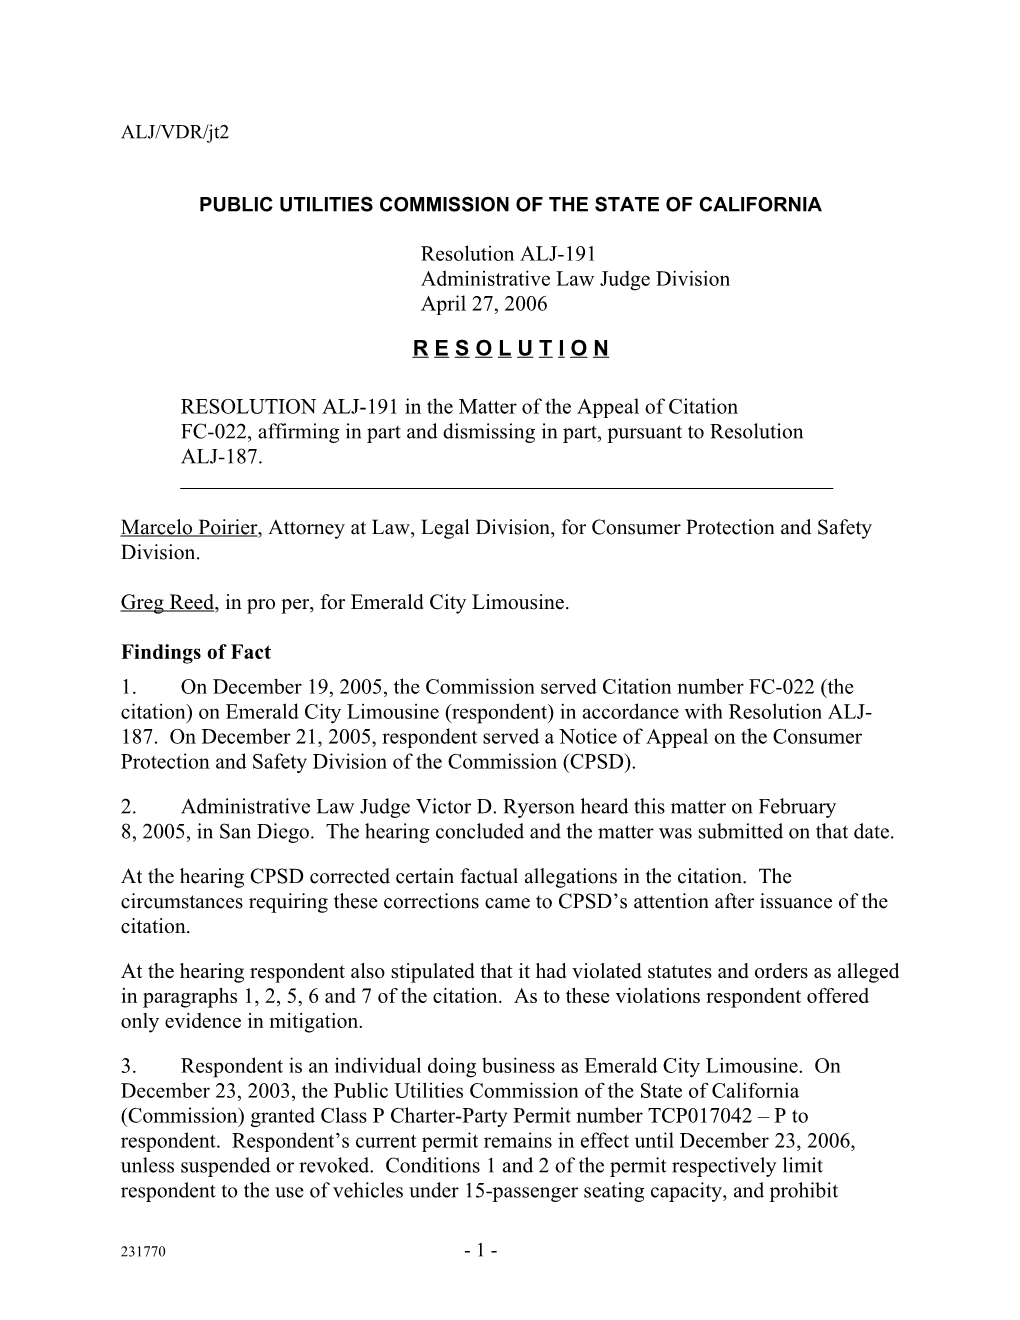 Public Utilities Commission of the State of California s128